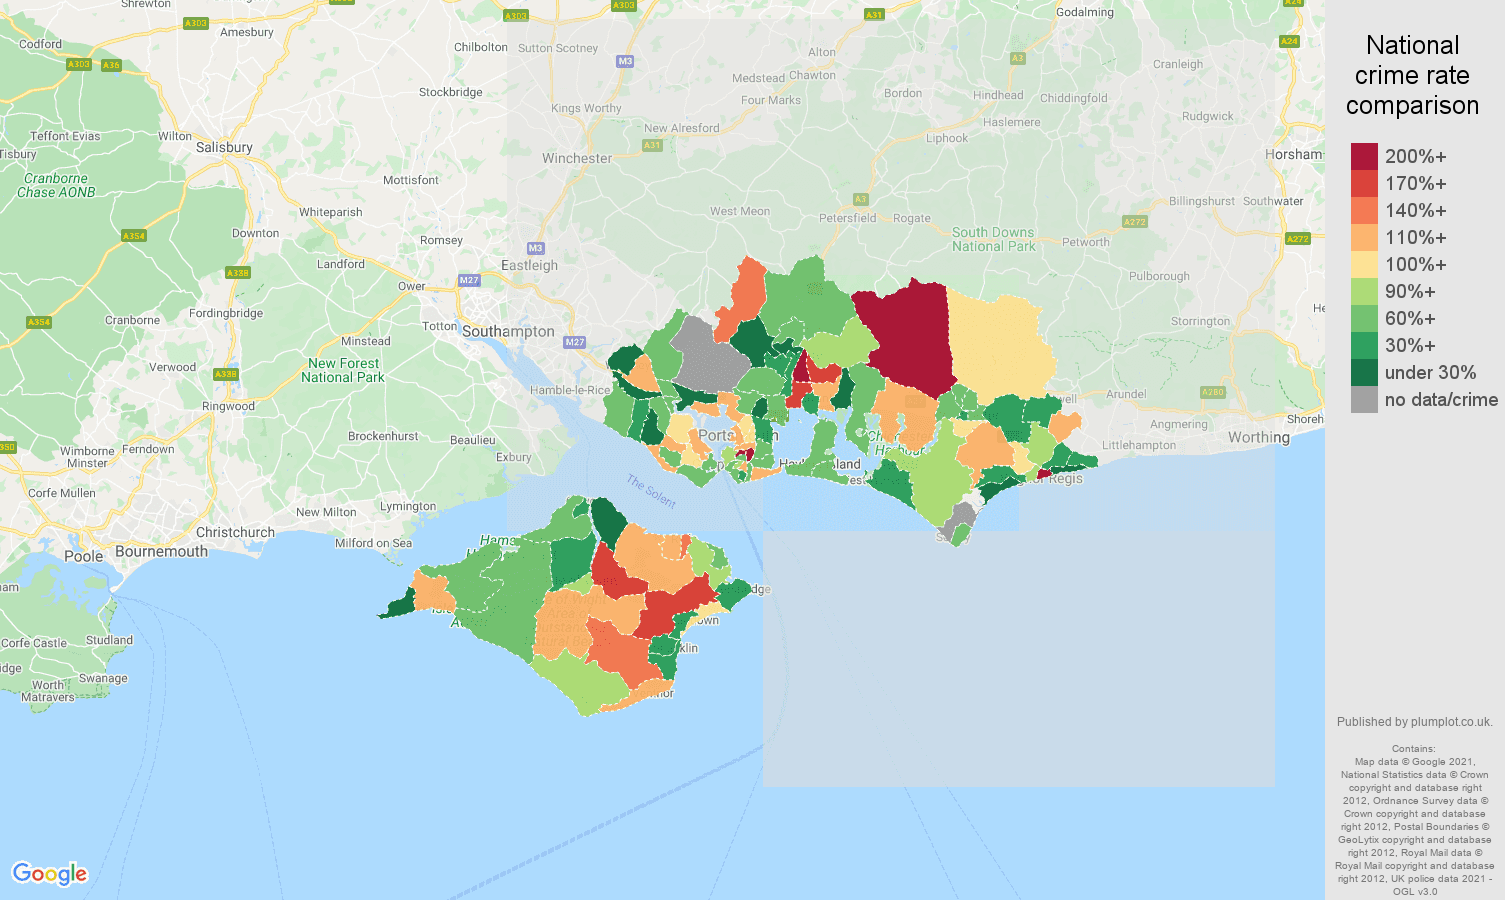 Portsmouth other crime rate comparison map